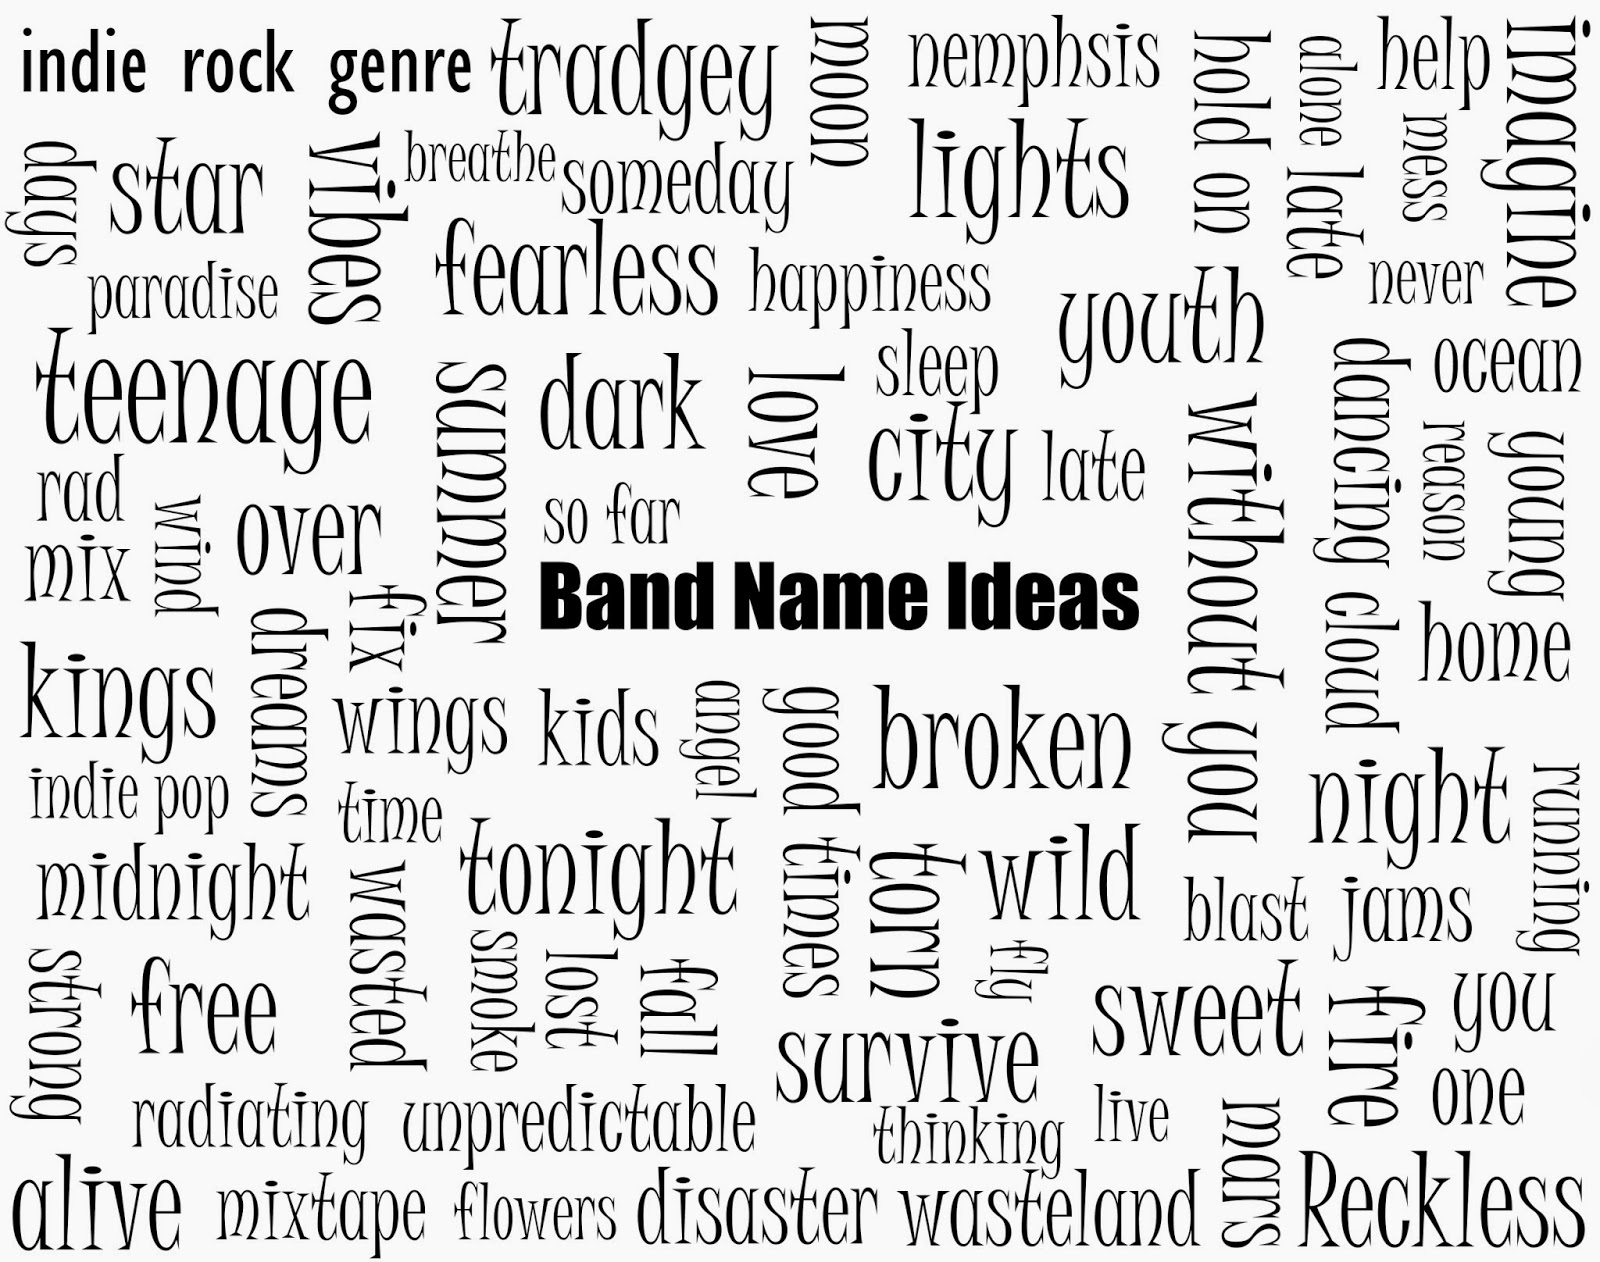 10 Best Band Name Ideas For Rock a2 media december 2013 2022